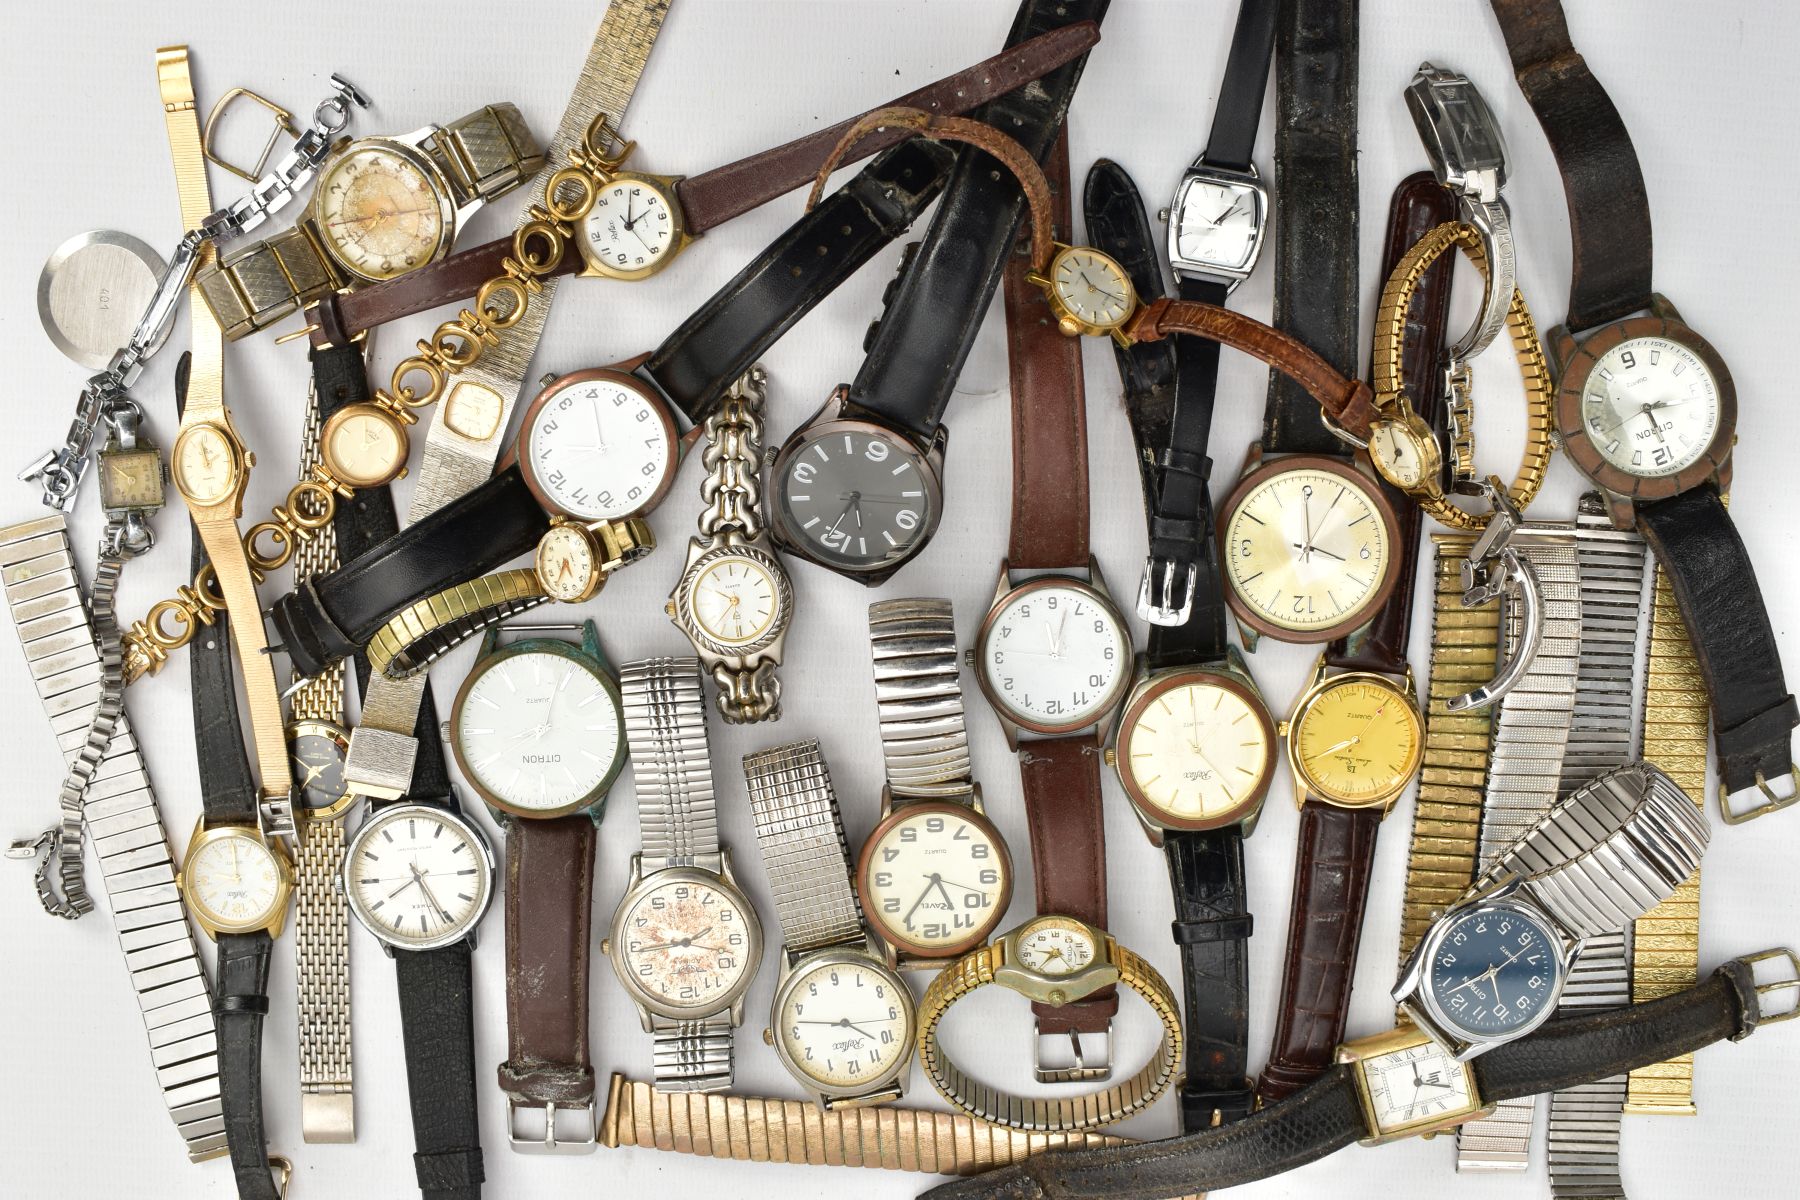 A BOX OF ASSORTED LADIES AND GENTS FASHION WRISTWATCHES, mostly quartz movements with names to